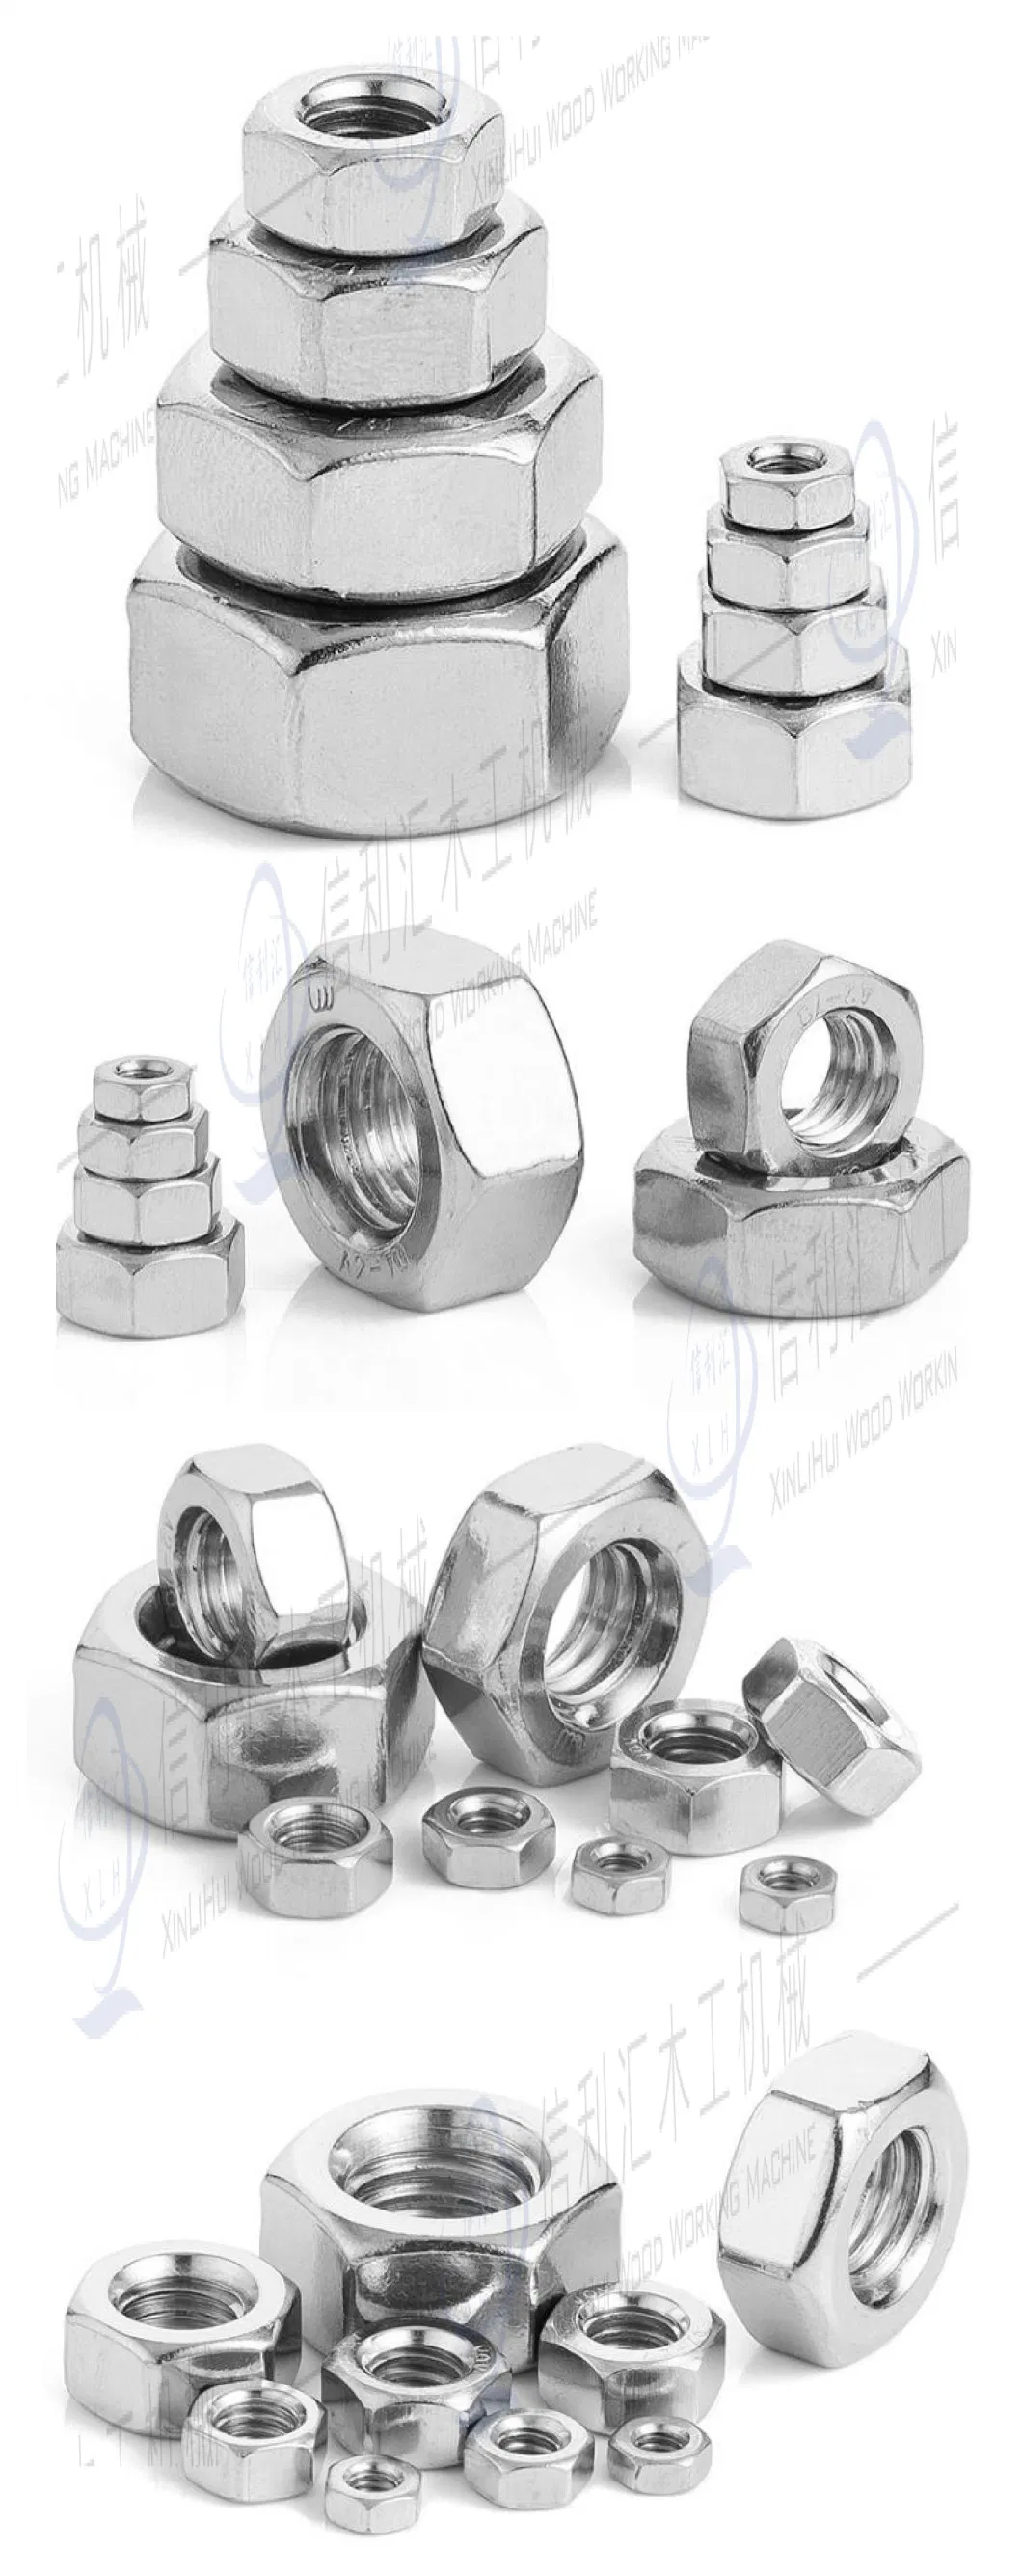 Hexagon Nuts M2.5 M3 M3.5 M4 M5 M6 M8 M10 M12 M14 M16 M22 M24 Hexagon Nuts Carbon Steel for Factory Wholesale Galvanized Hex Nuts Hexagonal Wood Wire Nuts